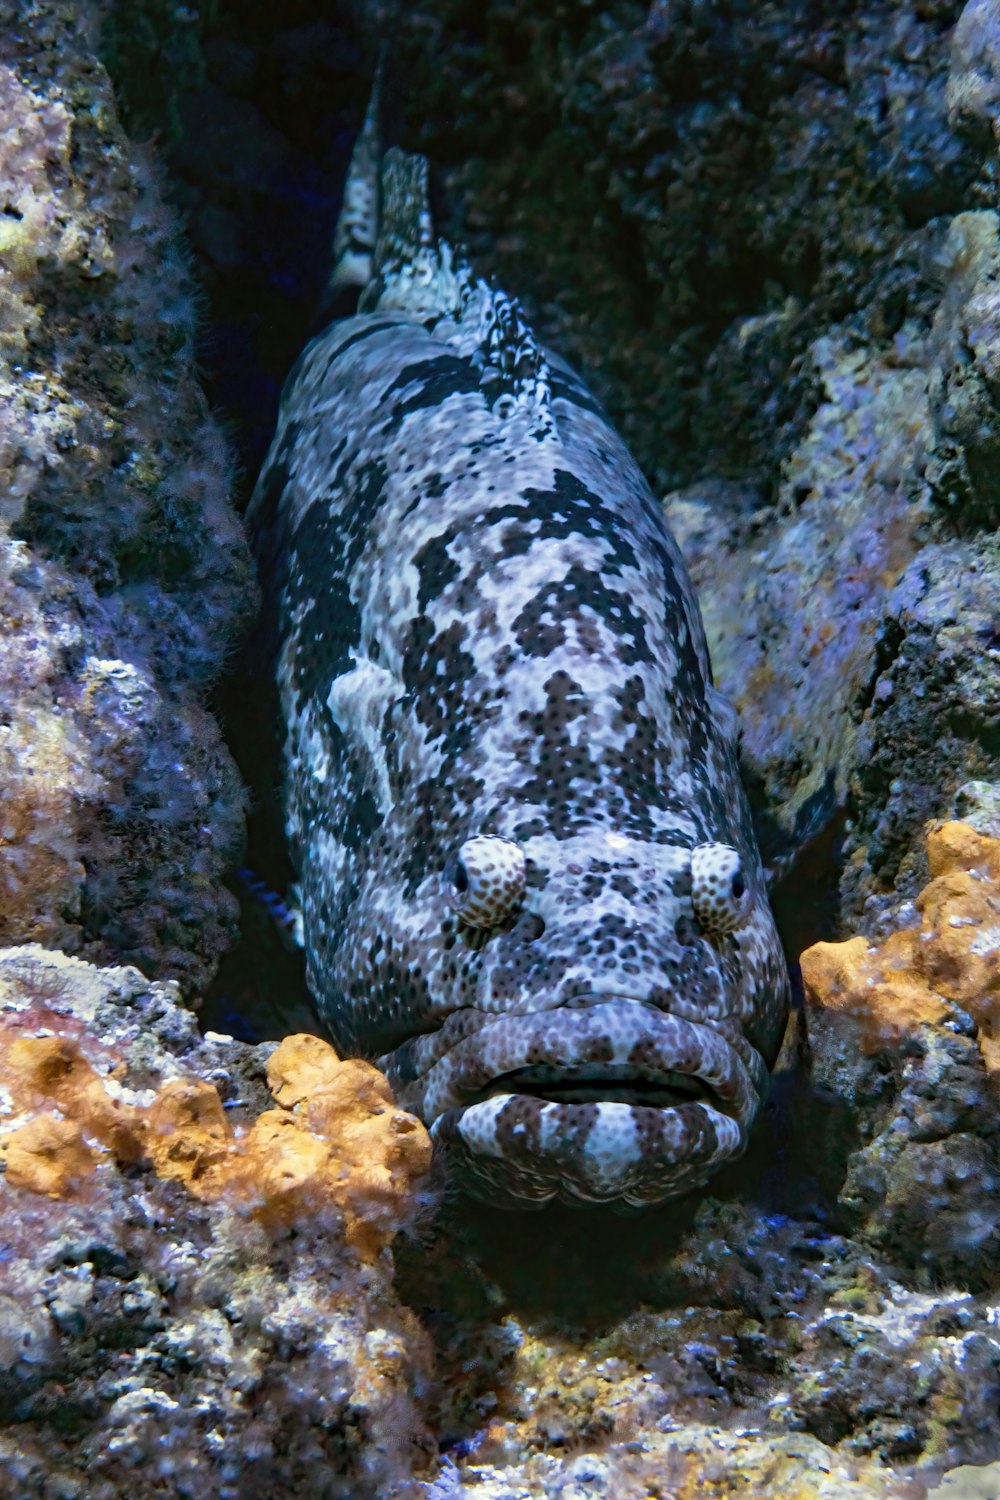 a black and white fish hiding in a coral